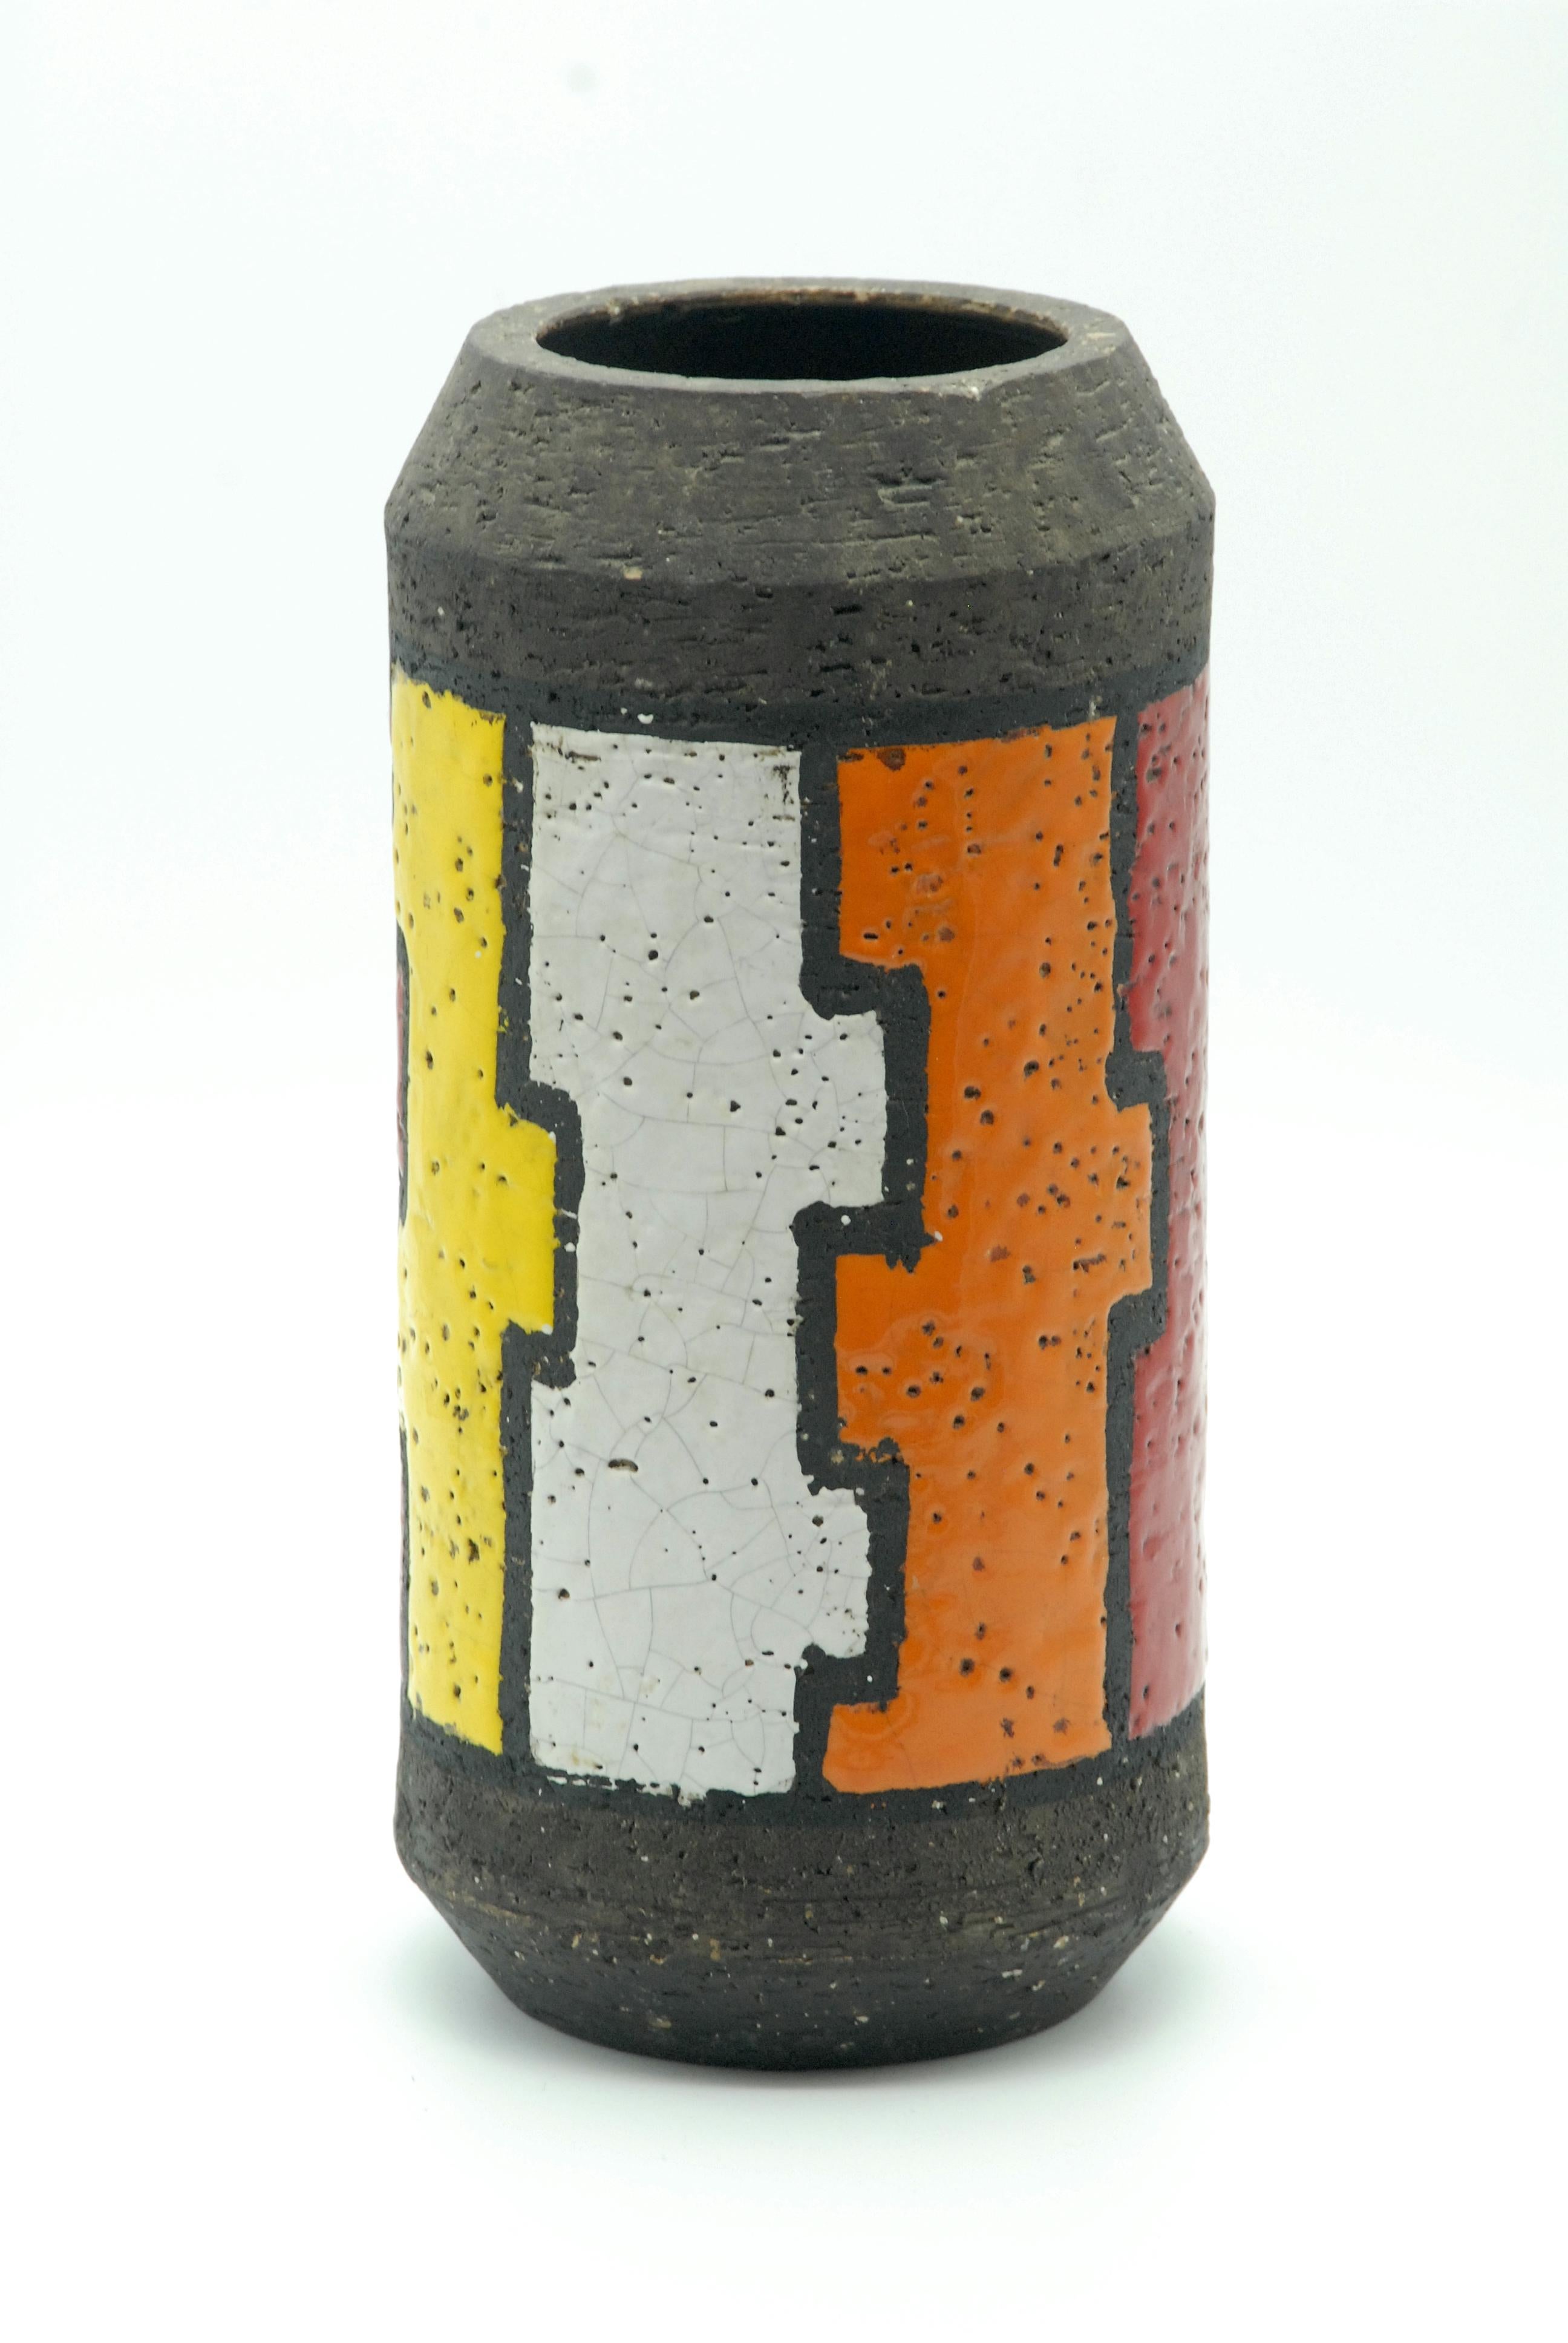 A beautiful and stunning colored 'Mondrian' series patterned vase from the late 1960s designed by Aldo Londi.